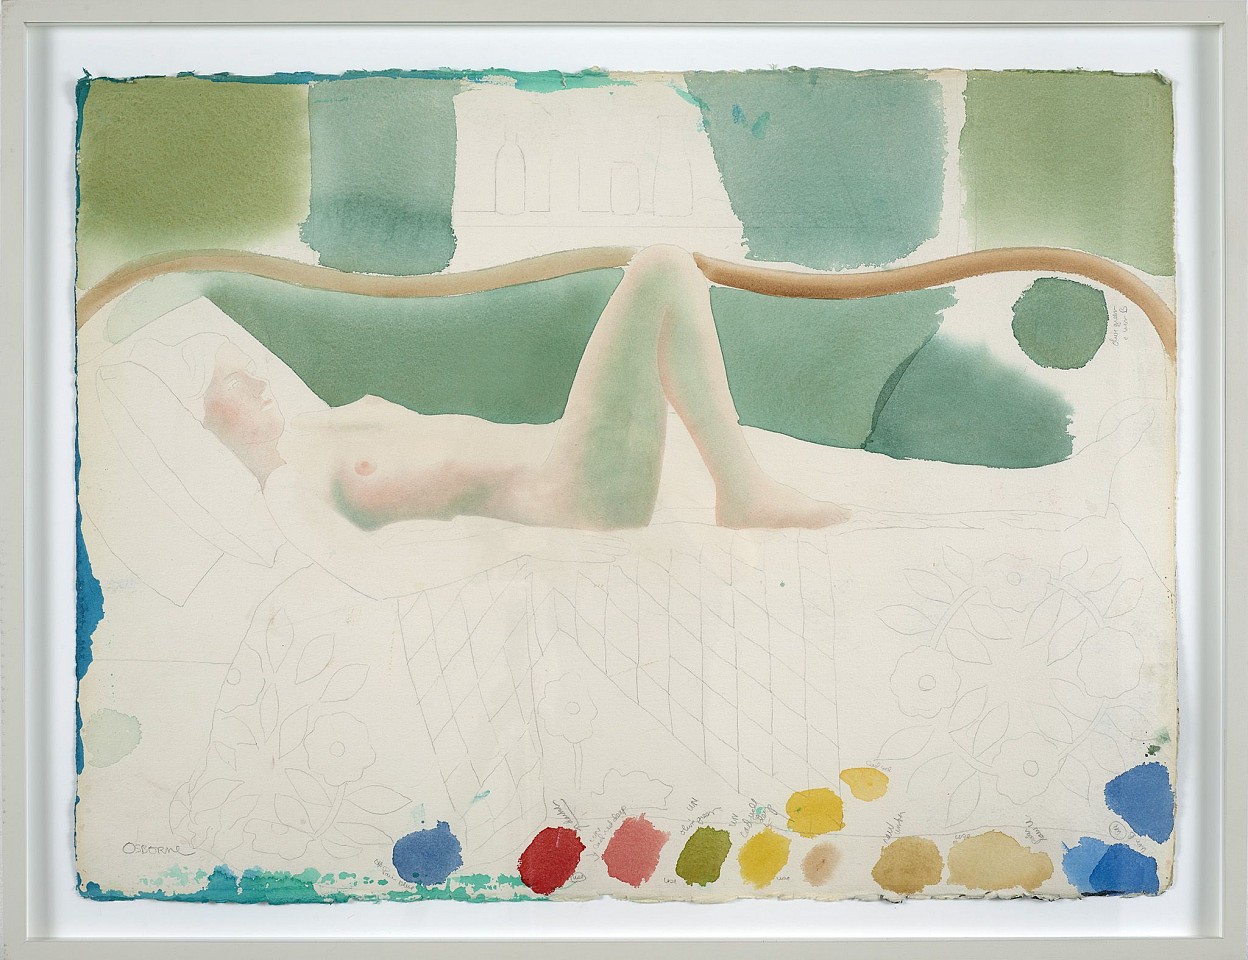 Elizabeth Osborne, Reclining Nude and Palette, 2002
Watercolor and graphite on paper, 23 x 30 in. (58.4 x 76.2 cm)
OSB-00075